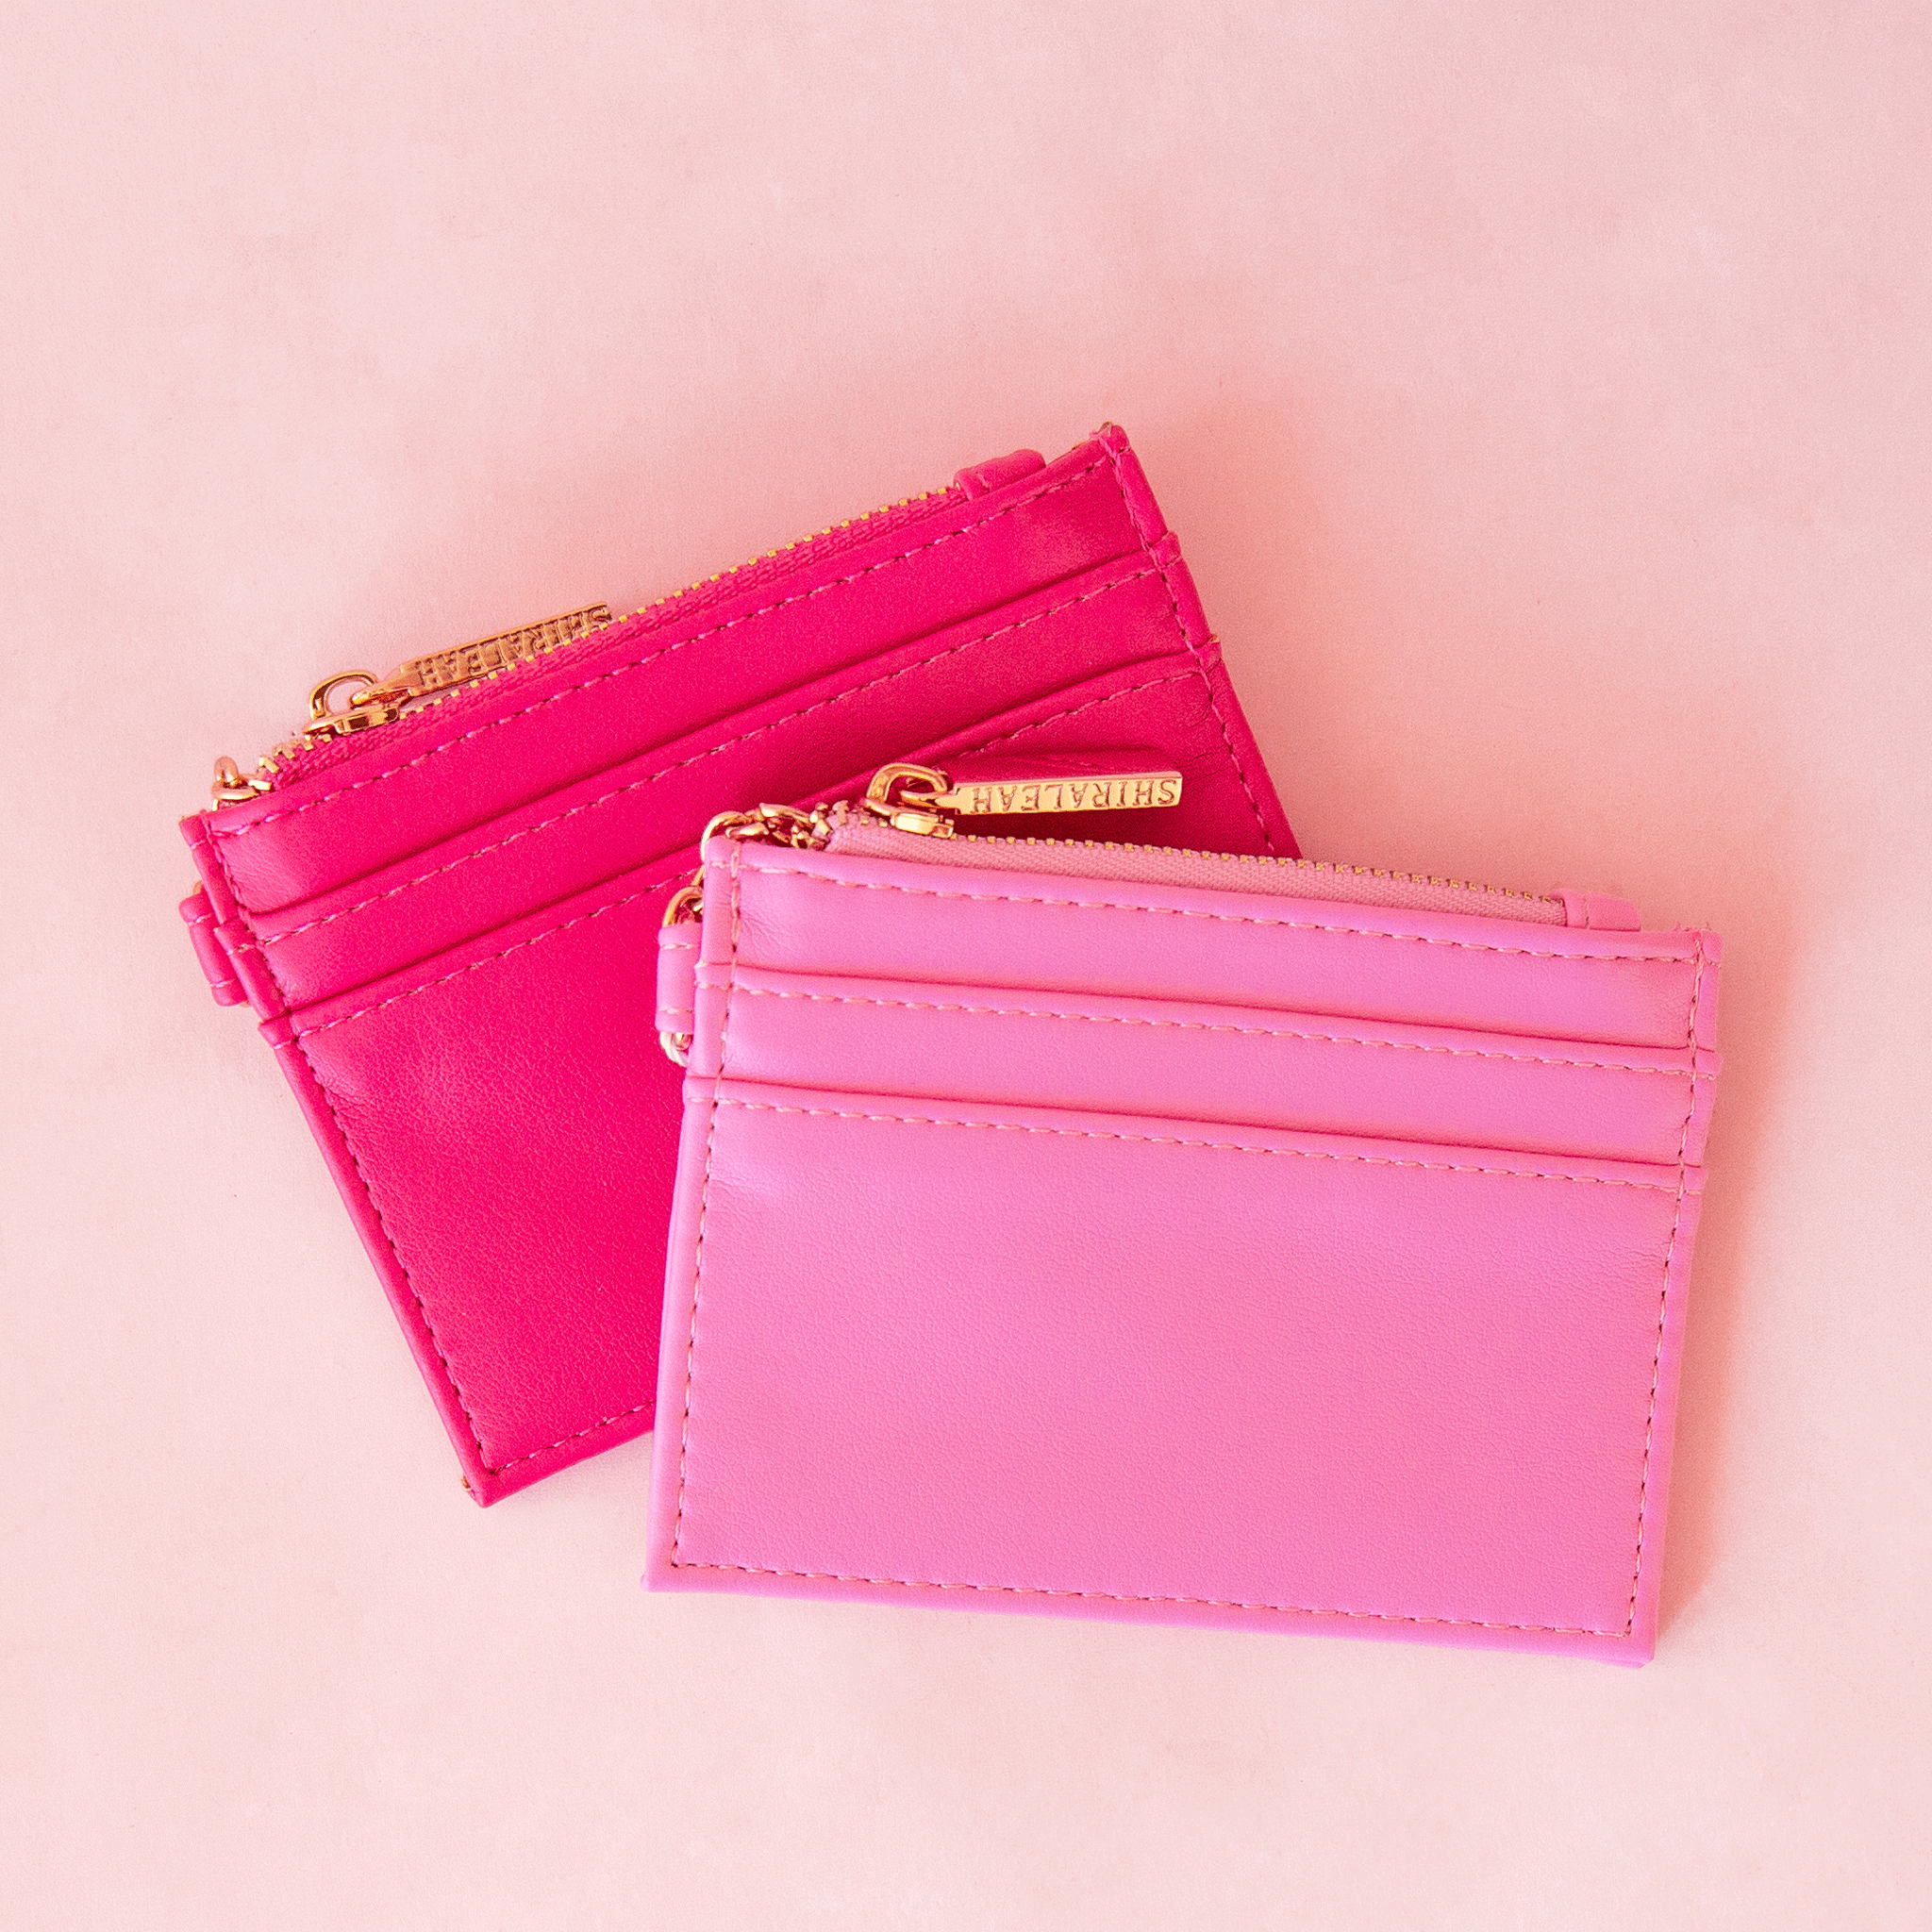 On a pink background is a bubble gum pink card case next to a hot pink version with a gold zipper and details. 